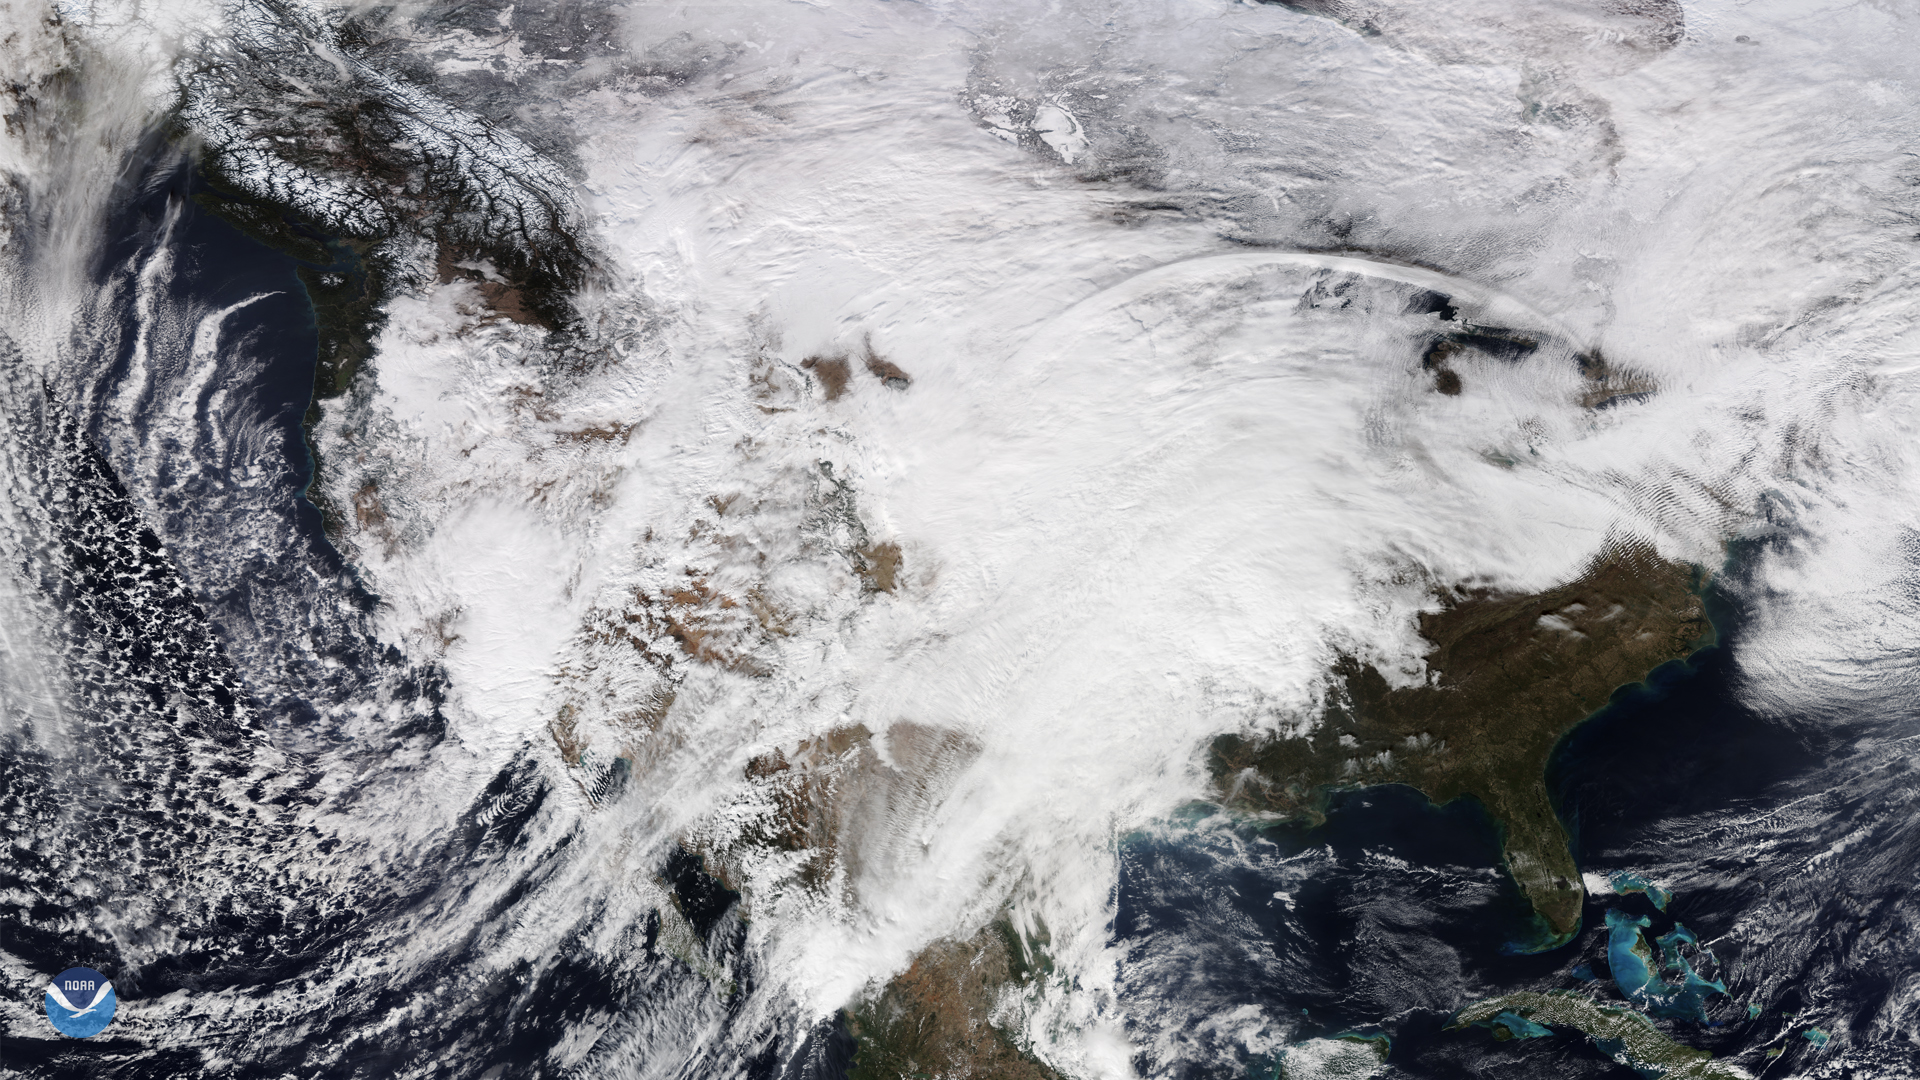 Severe Weather for the Western United States Transitions to Precipitation in the East